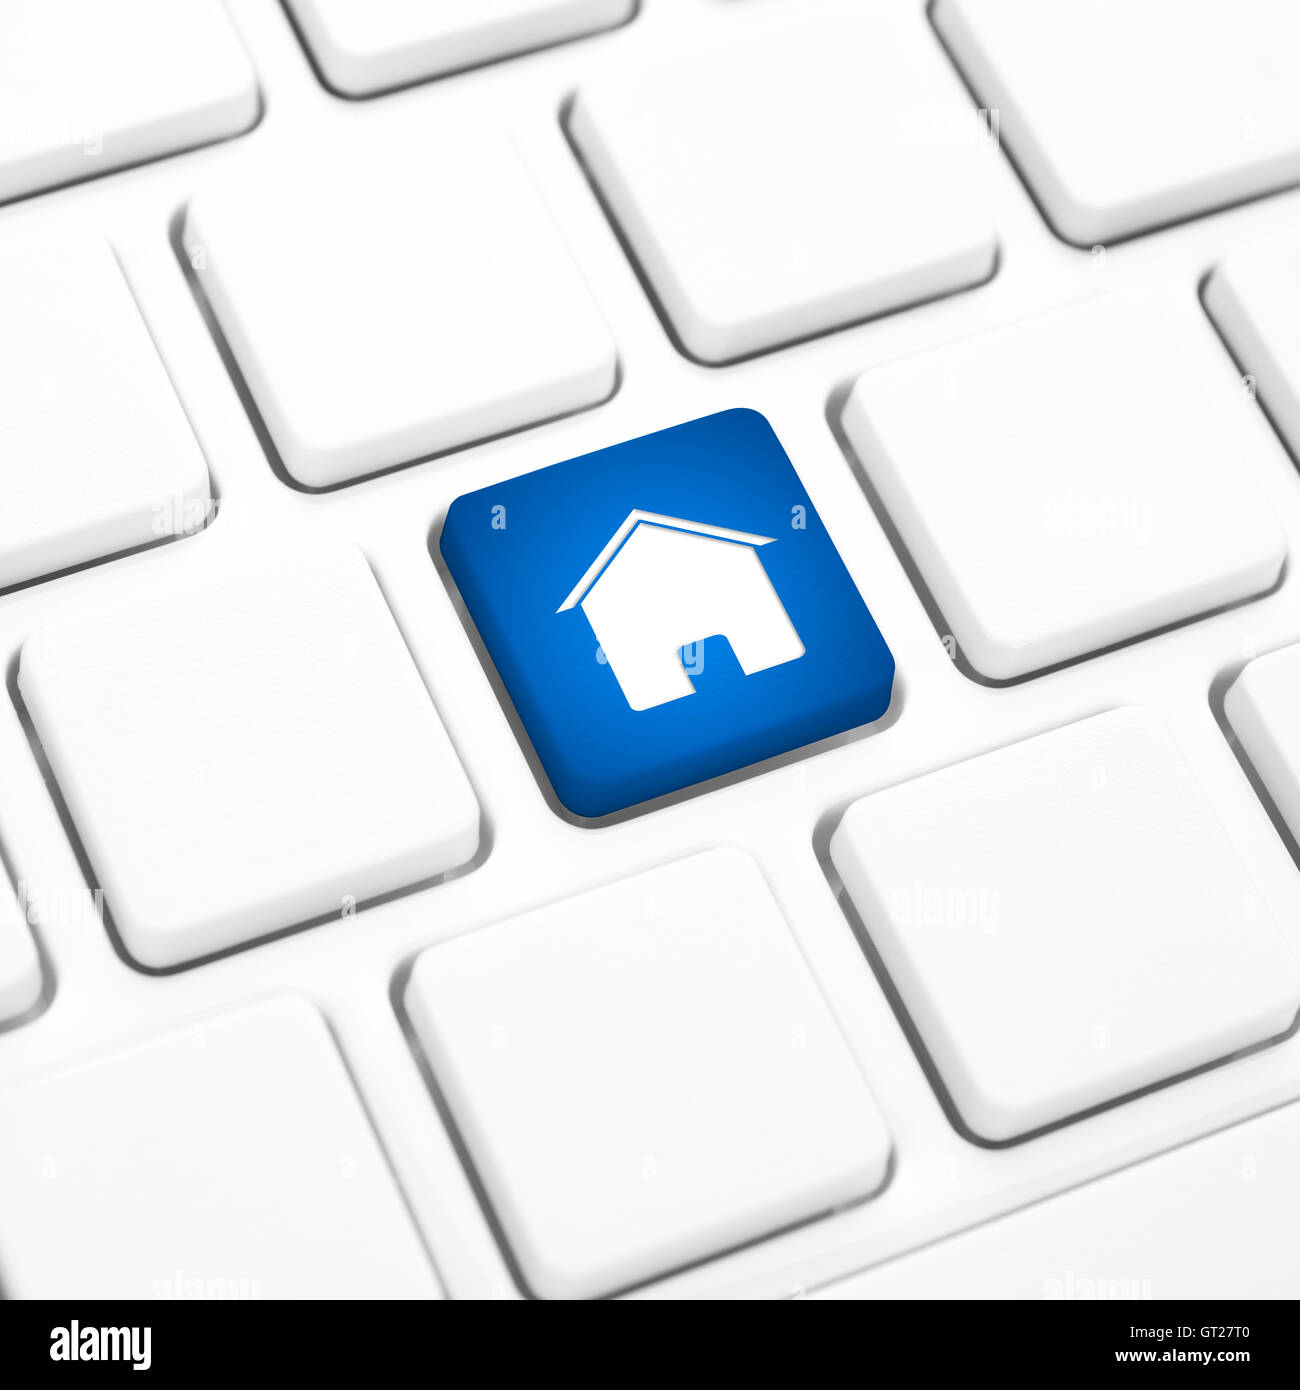 Home or real estate concept, blue house button or key on white keyboard Stock Photo